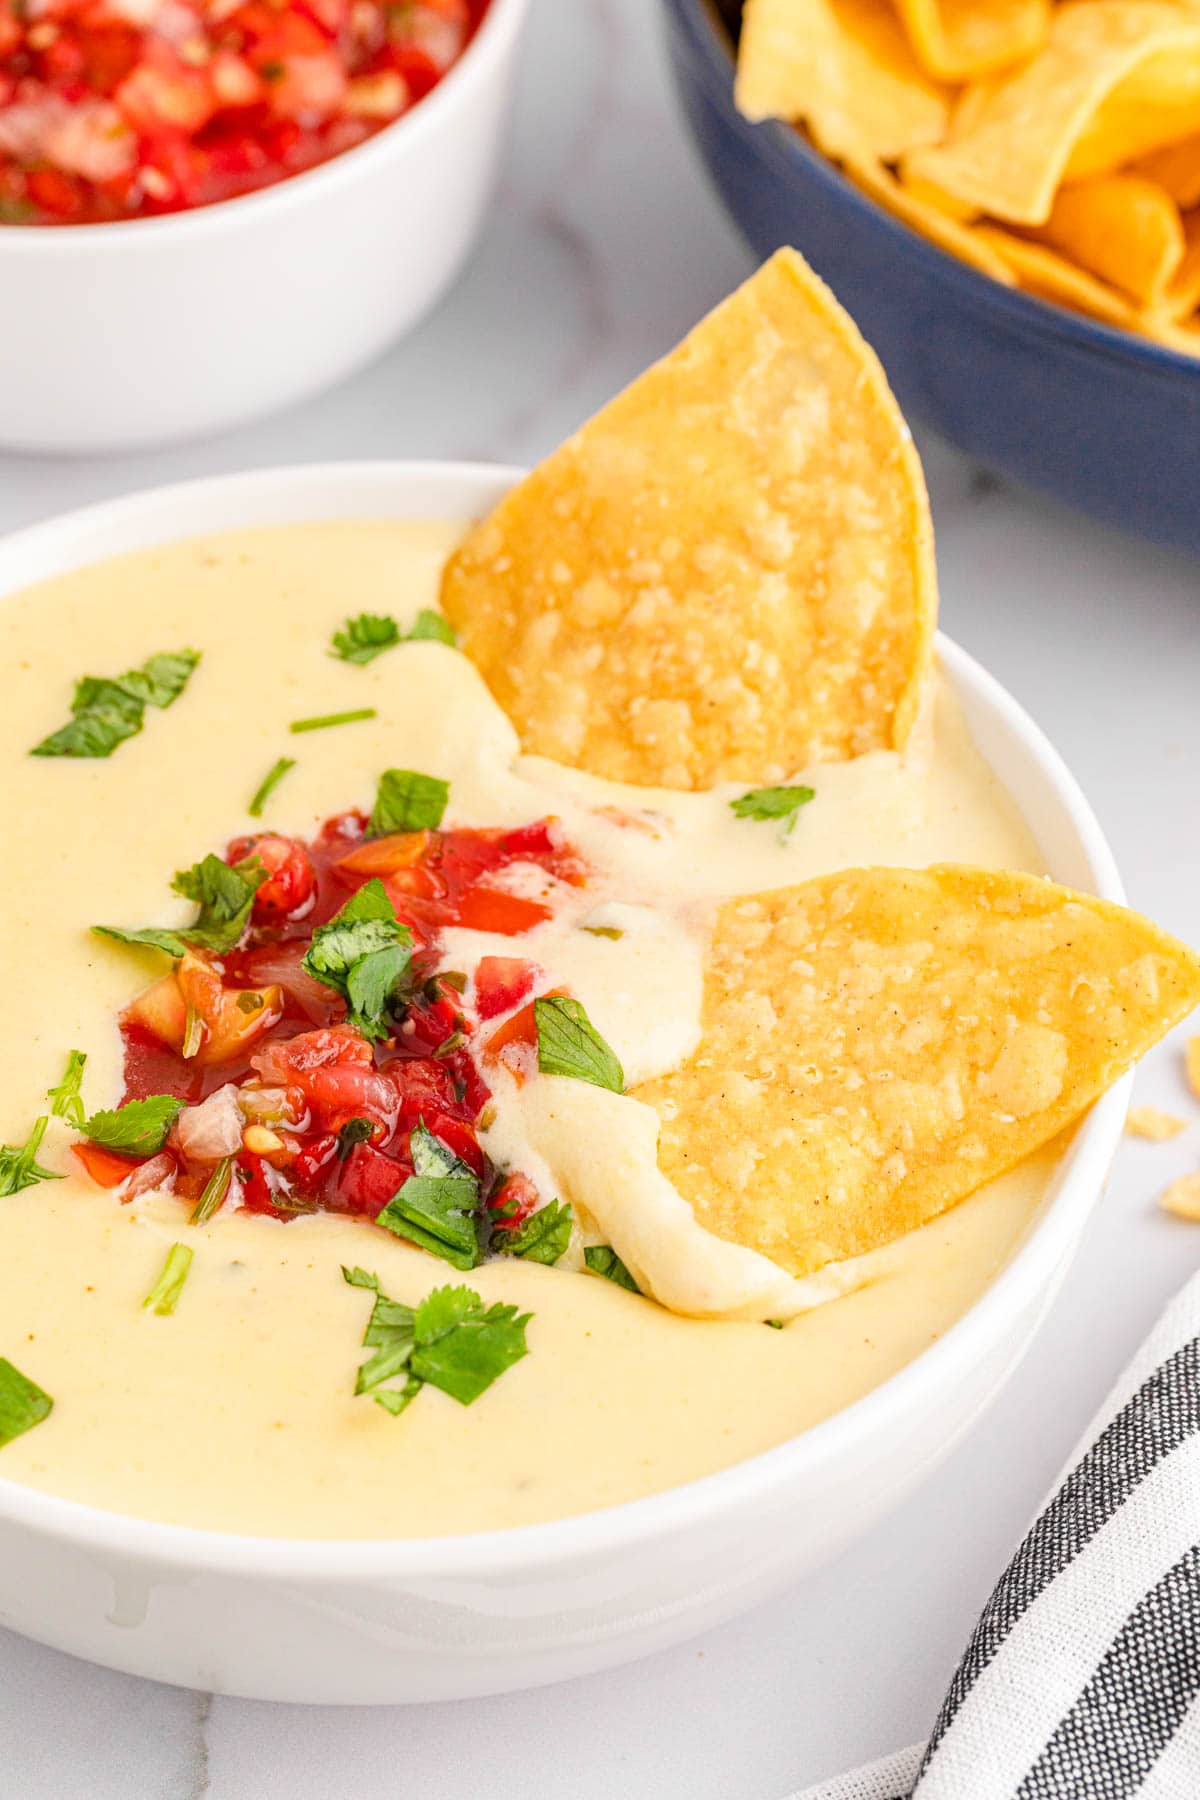 Chips dipped into queso dip